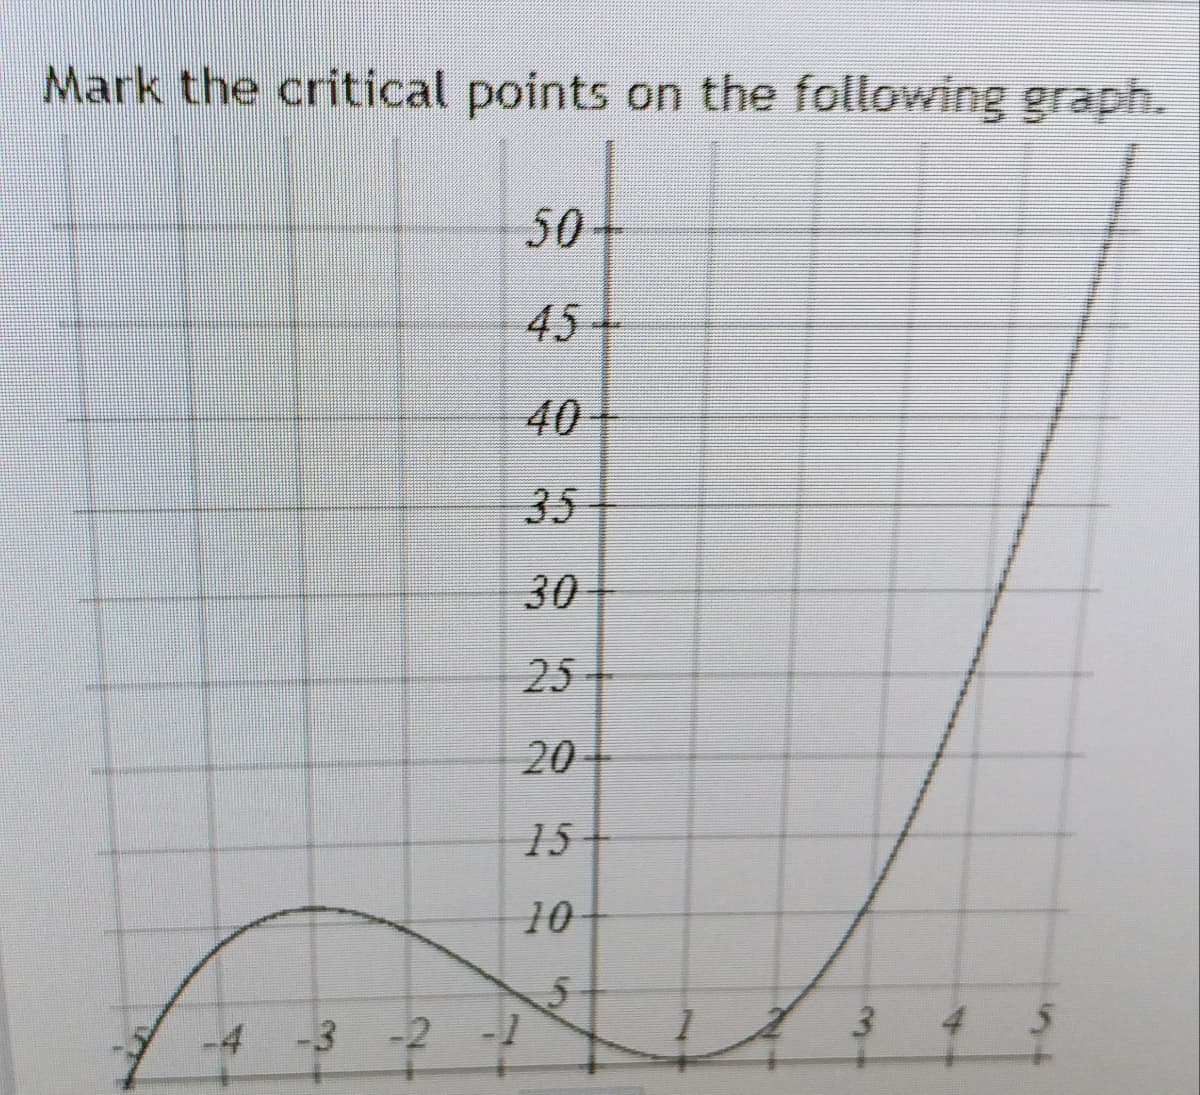 Mark the critical points on the following graph.
50
45+
40
35
30
25
20
15
10
-4 -3 -2 -1
3.
